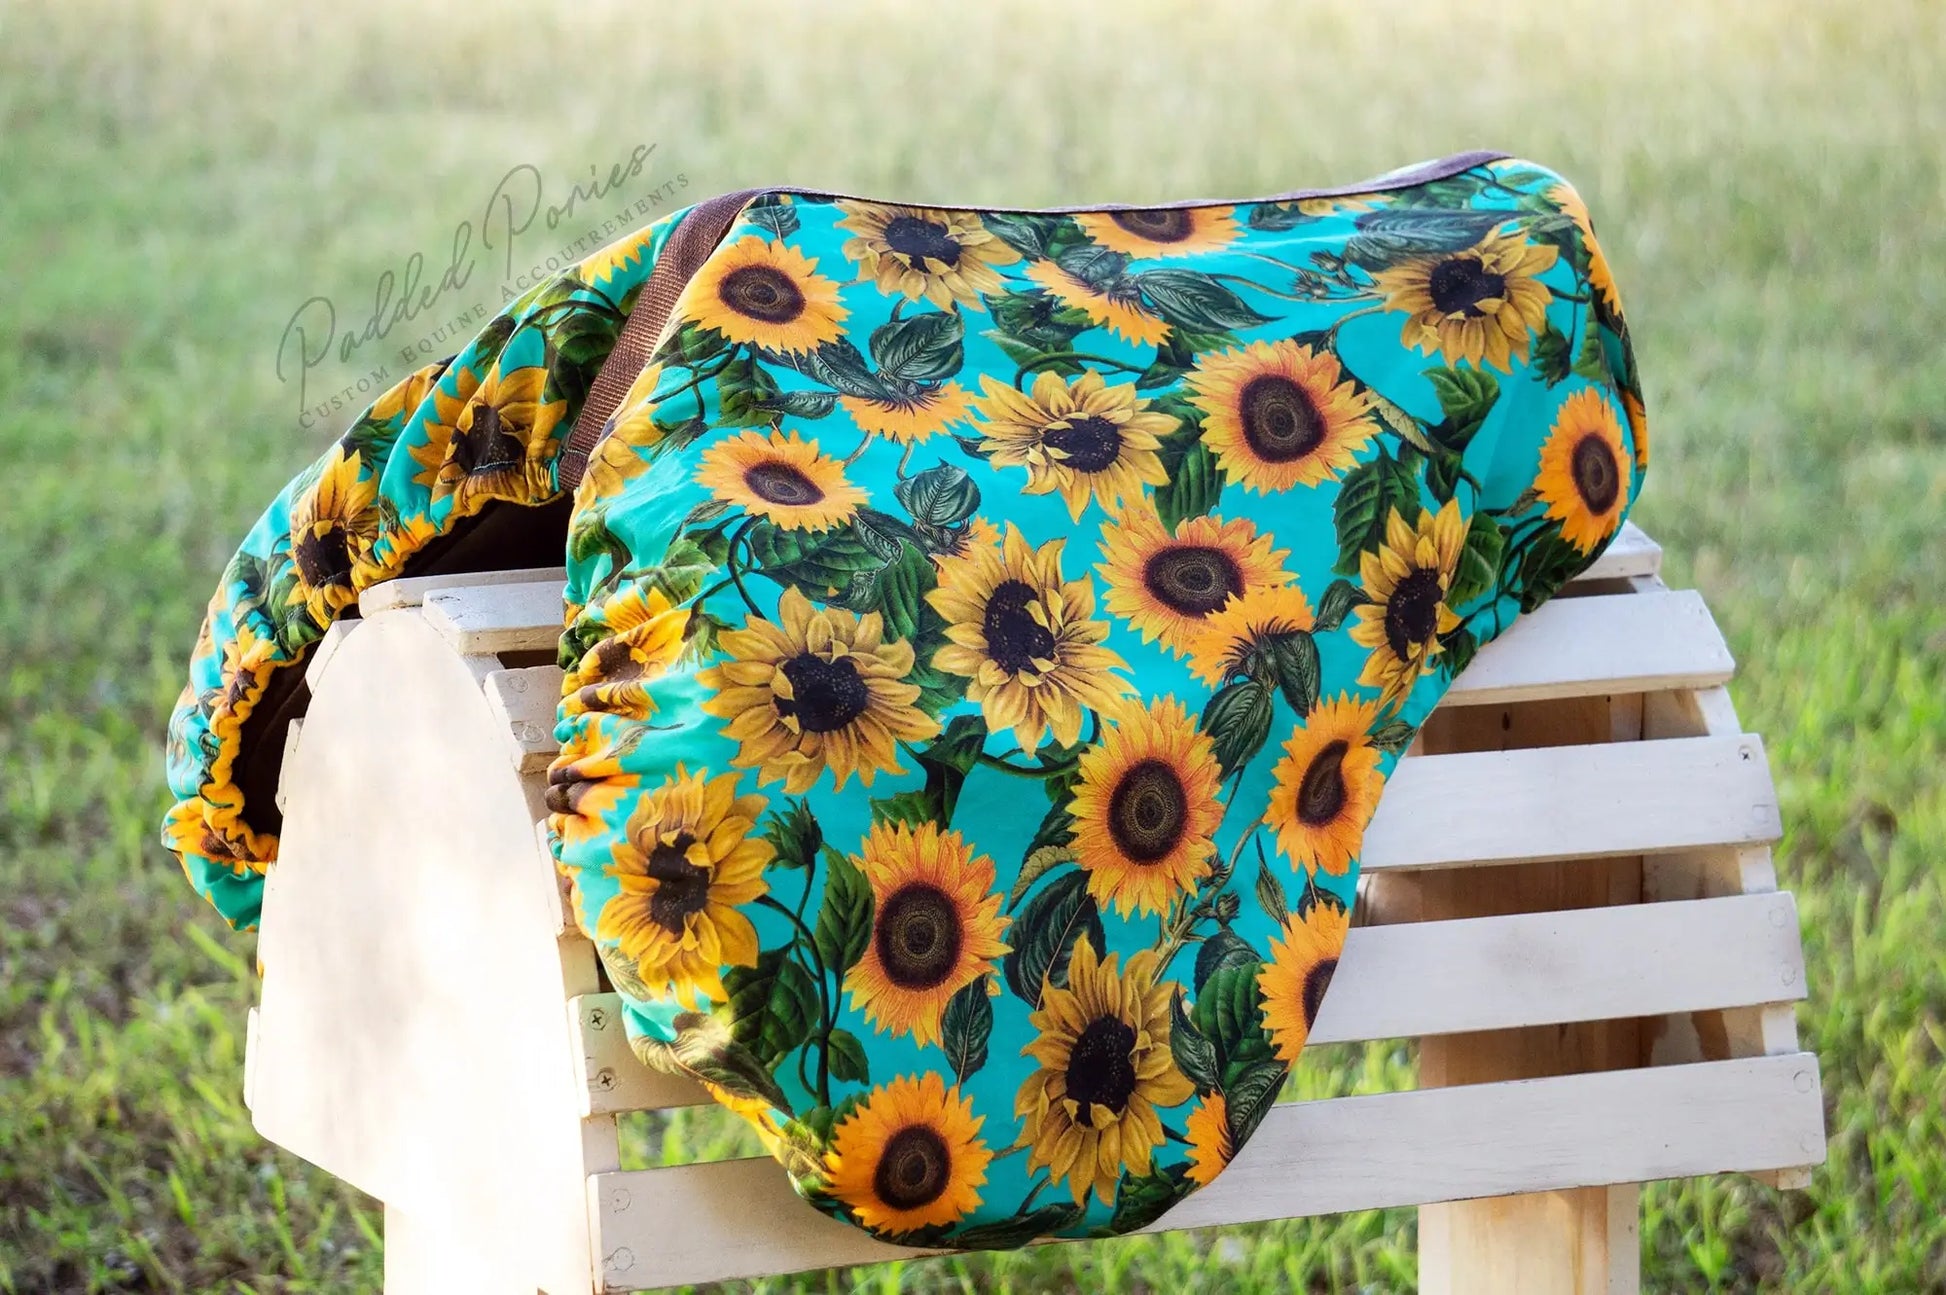 Turquoise Teal Aqua Yellow Sunflowers Floral All Purpose Saddle Cover